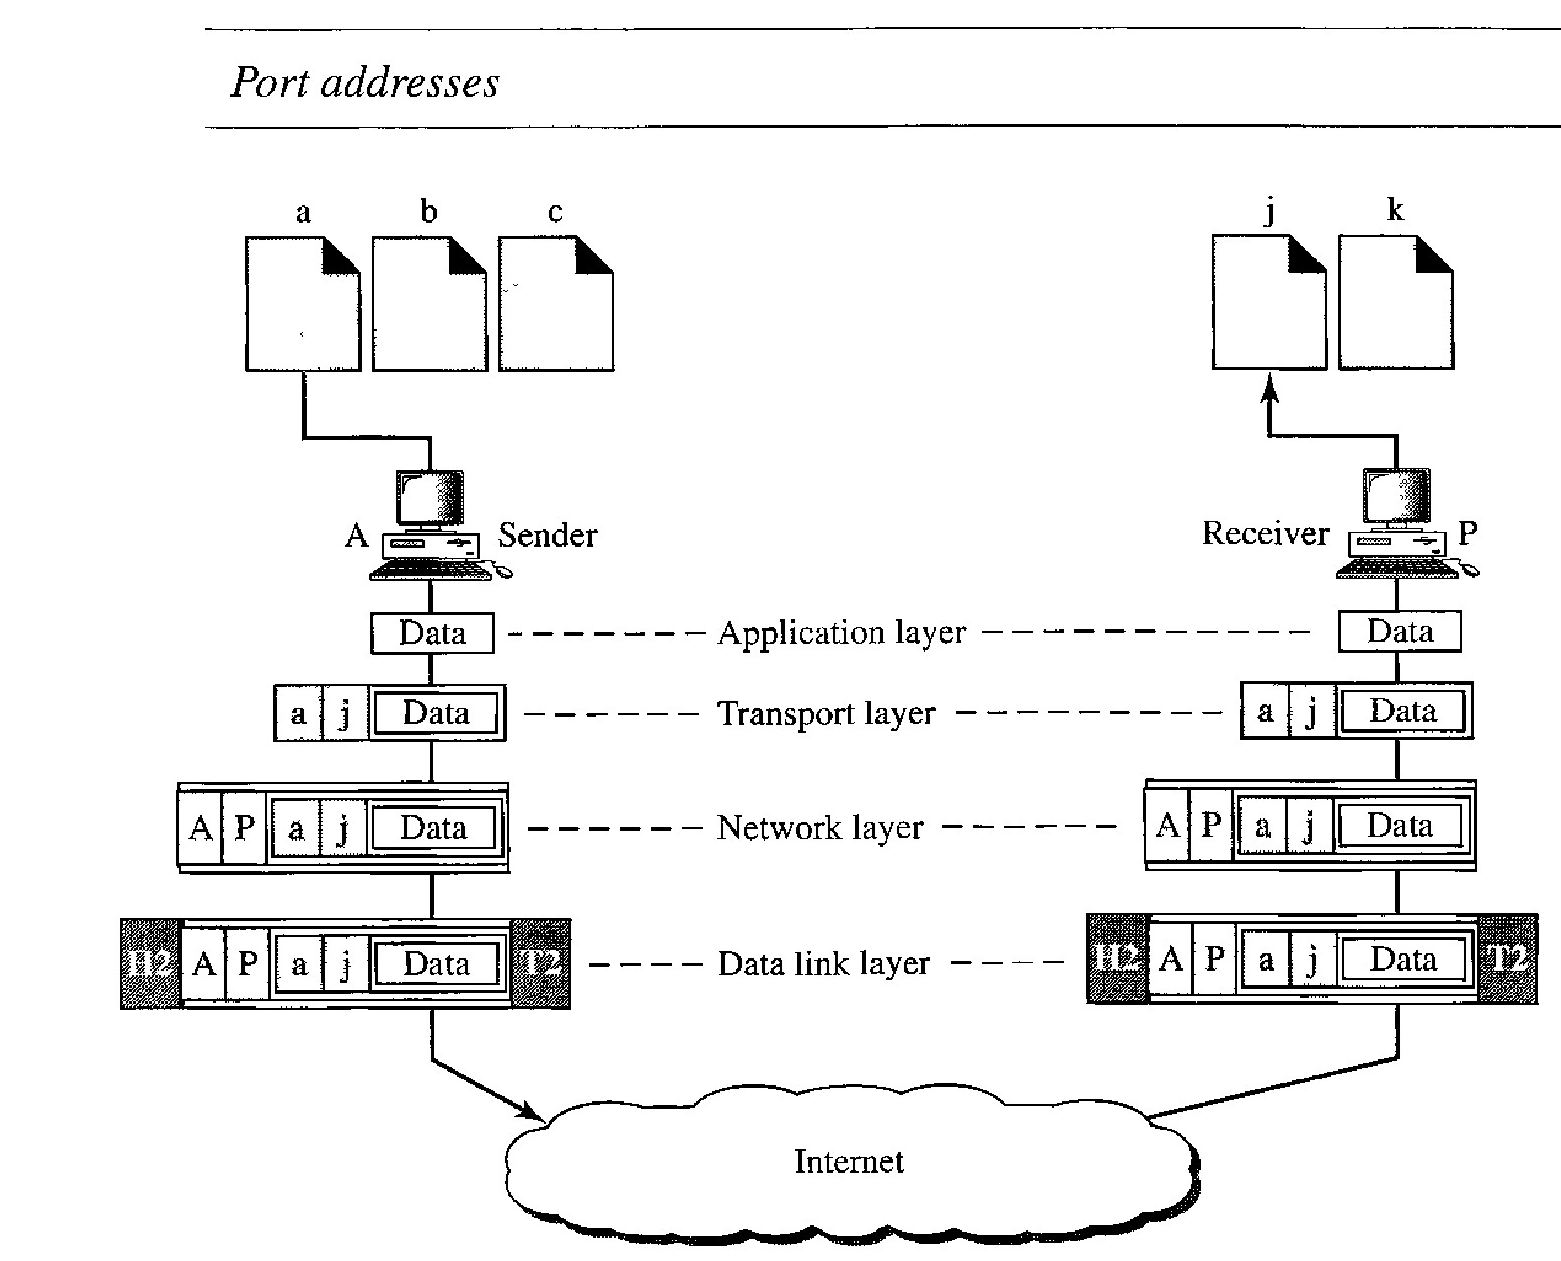 Four levels of addresses are used in an internet employing the TCP/IP protocols